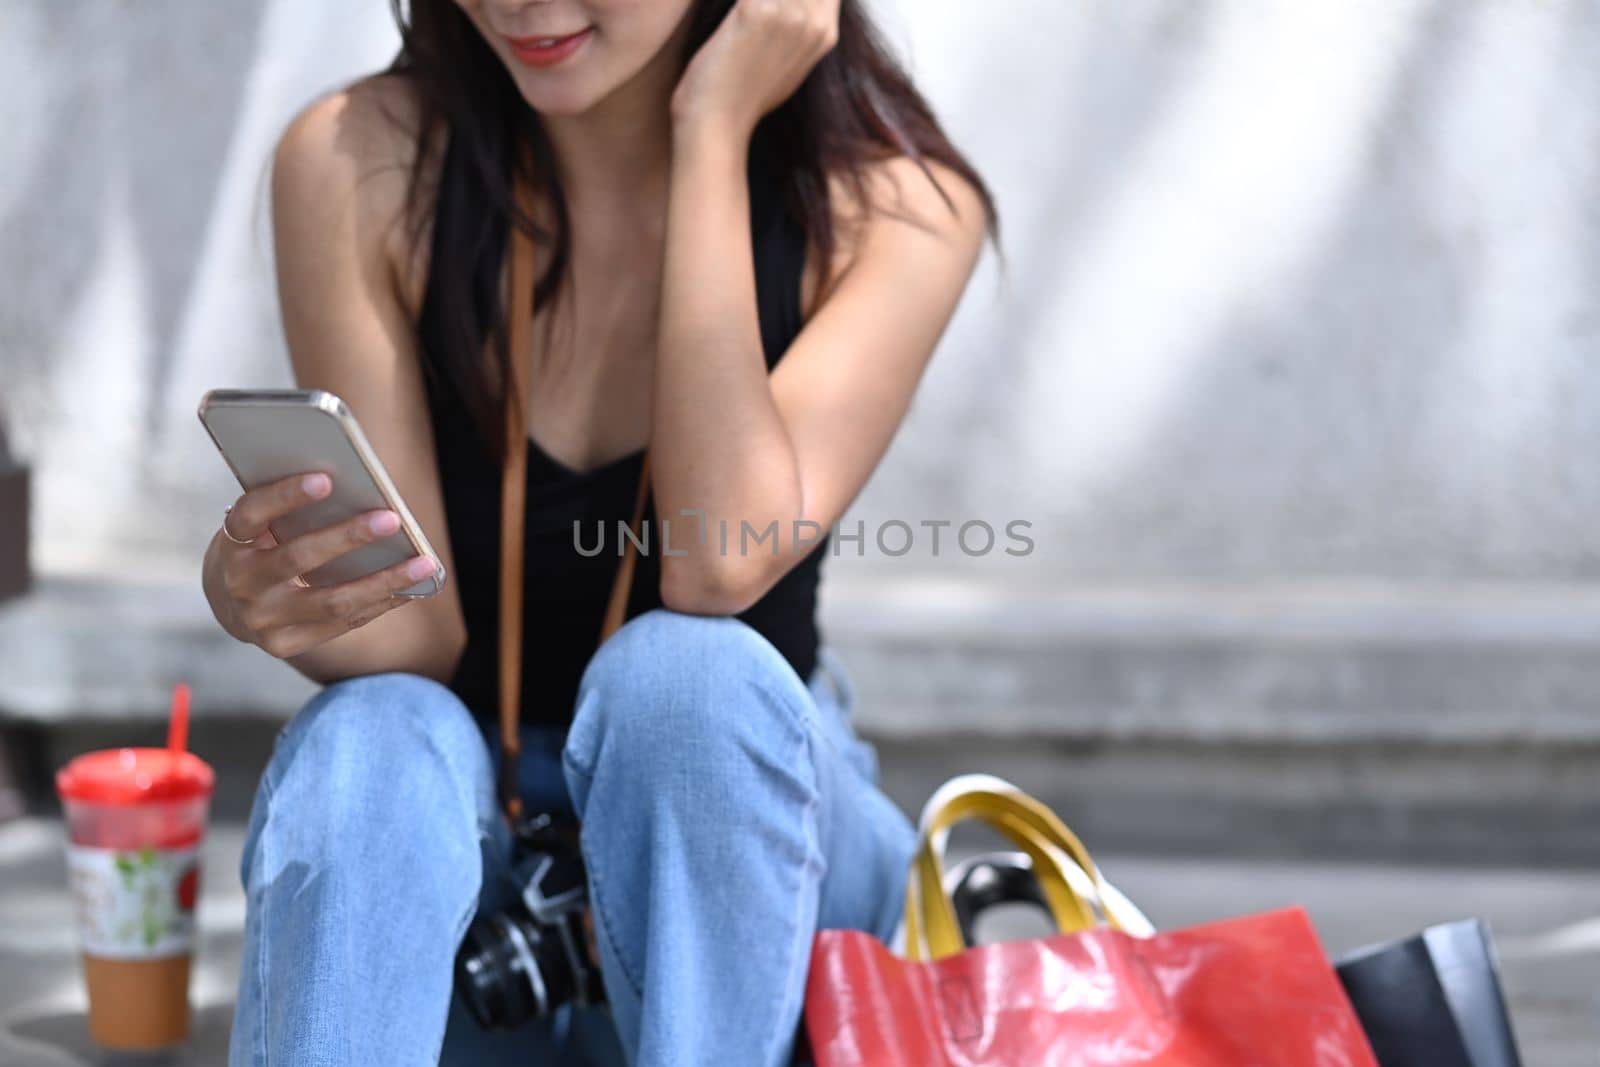 Smiling young woman using smart phone and sitting on stairs with shopping bags.